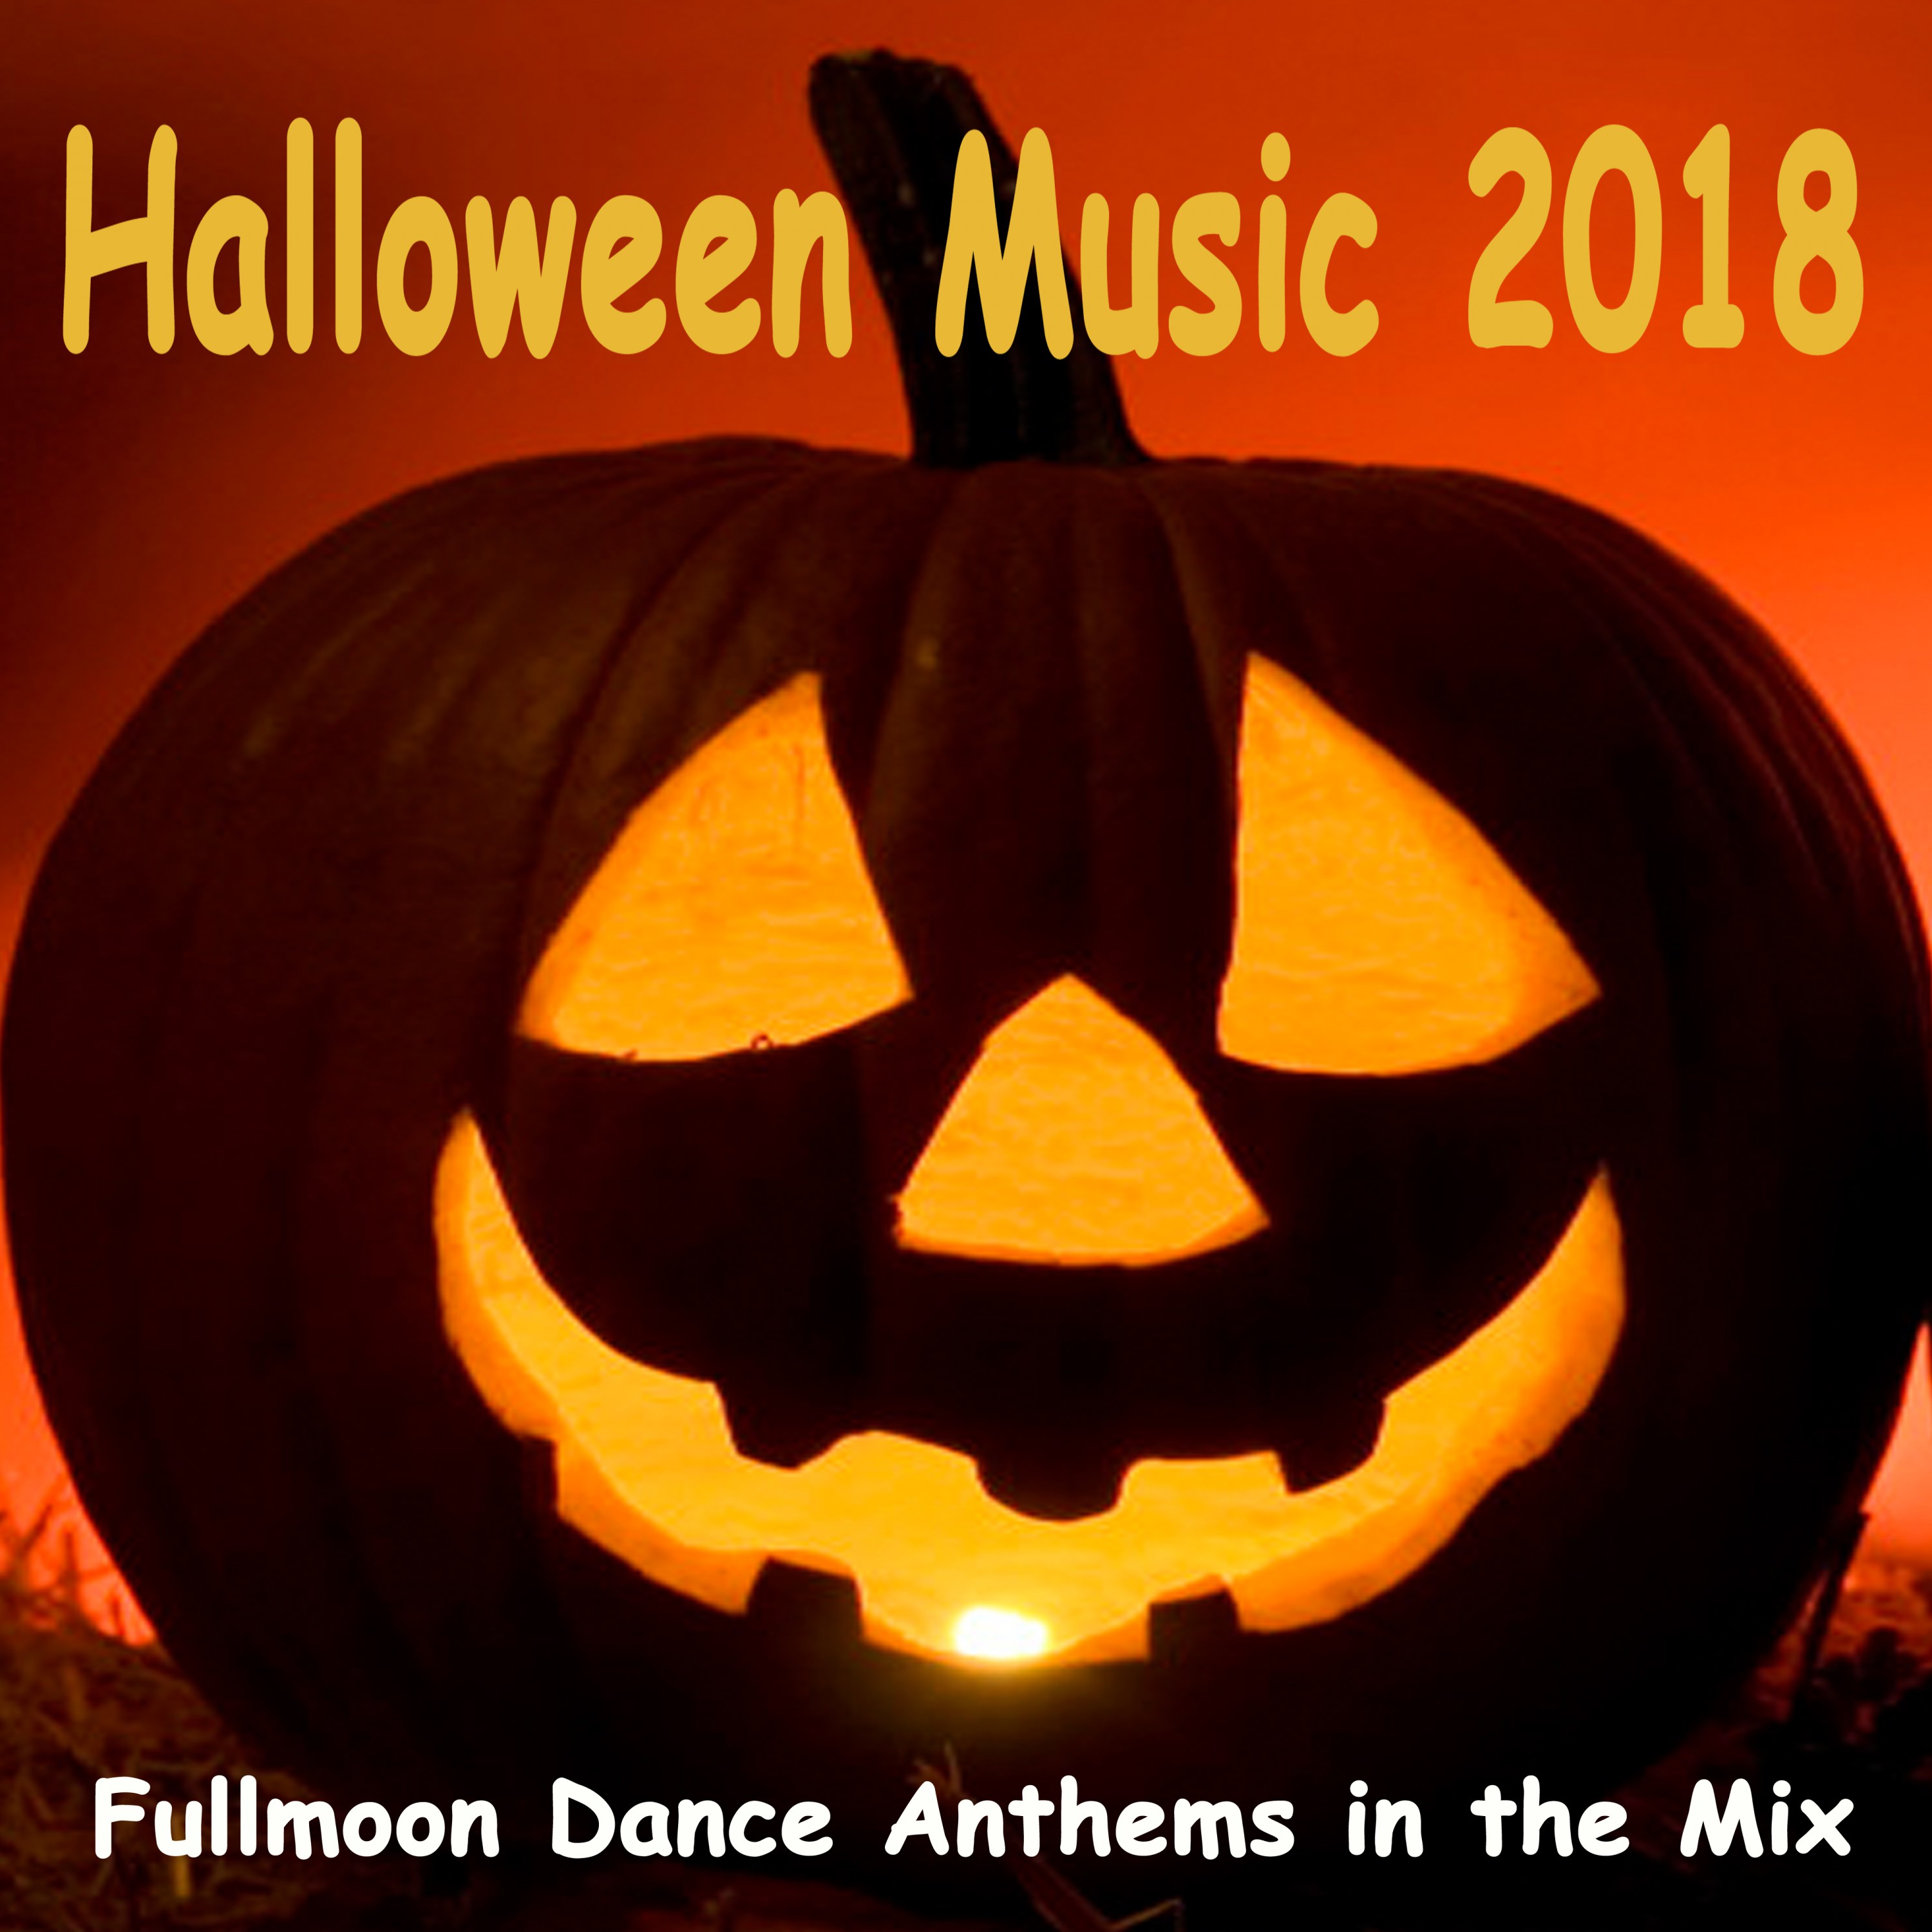 Halloween Music 2018 (Fullmoon Dance Anthems in the Mix)